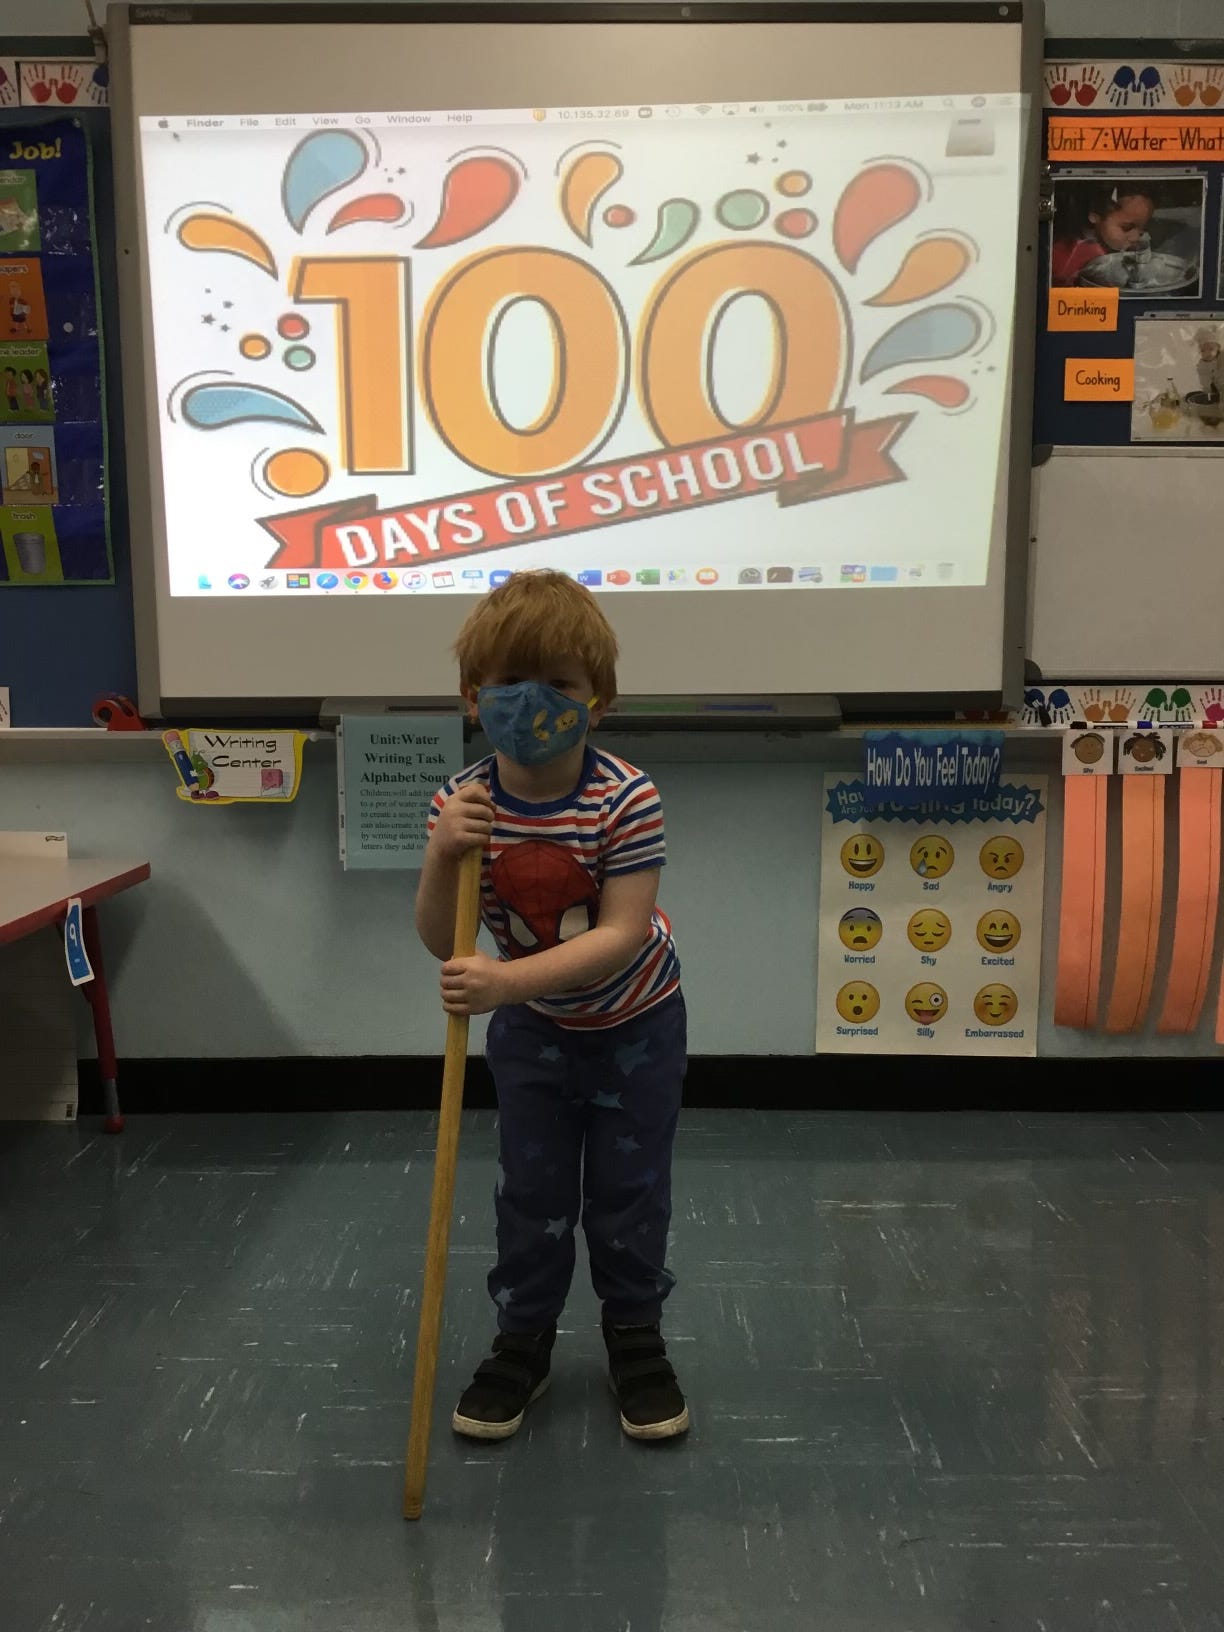 A youung boy stands with a cane in front of a one-hundred days of school banner"